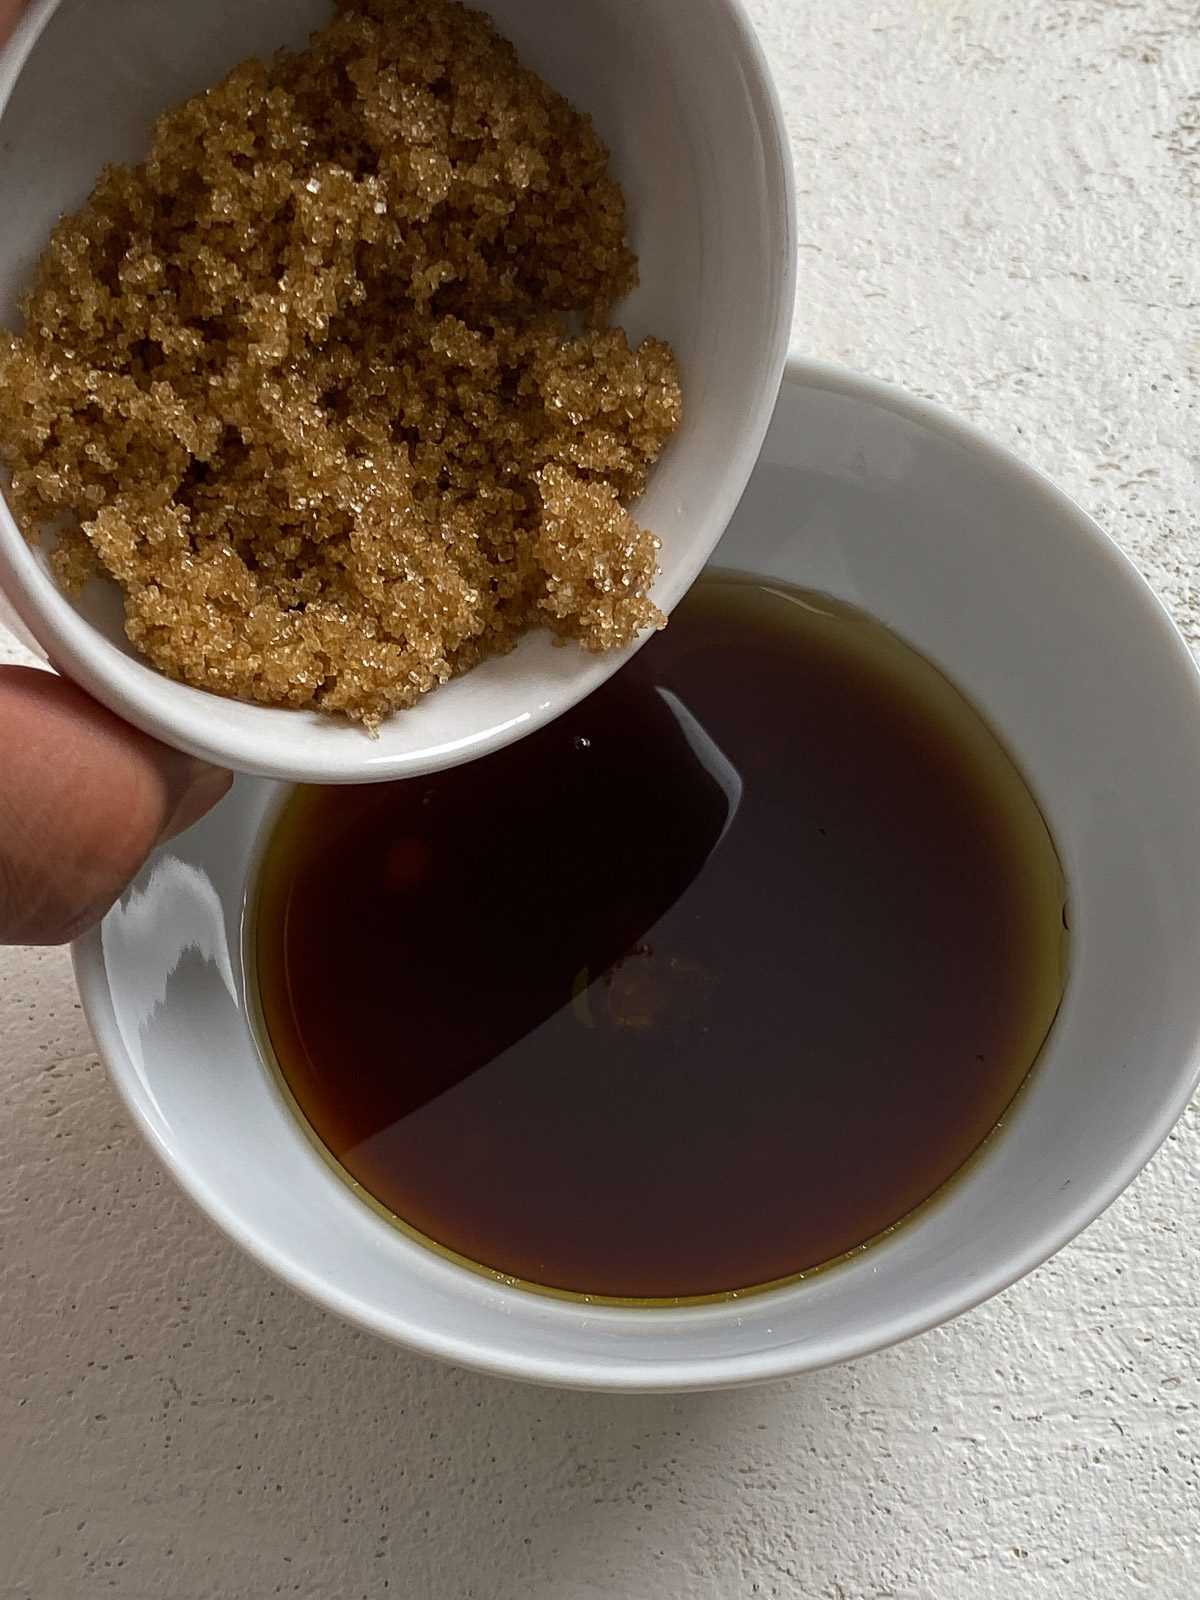 process of brown sugar added to bowl of sauce